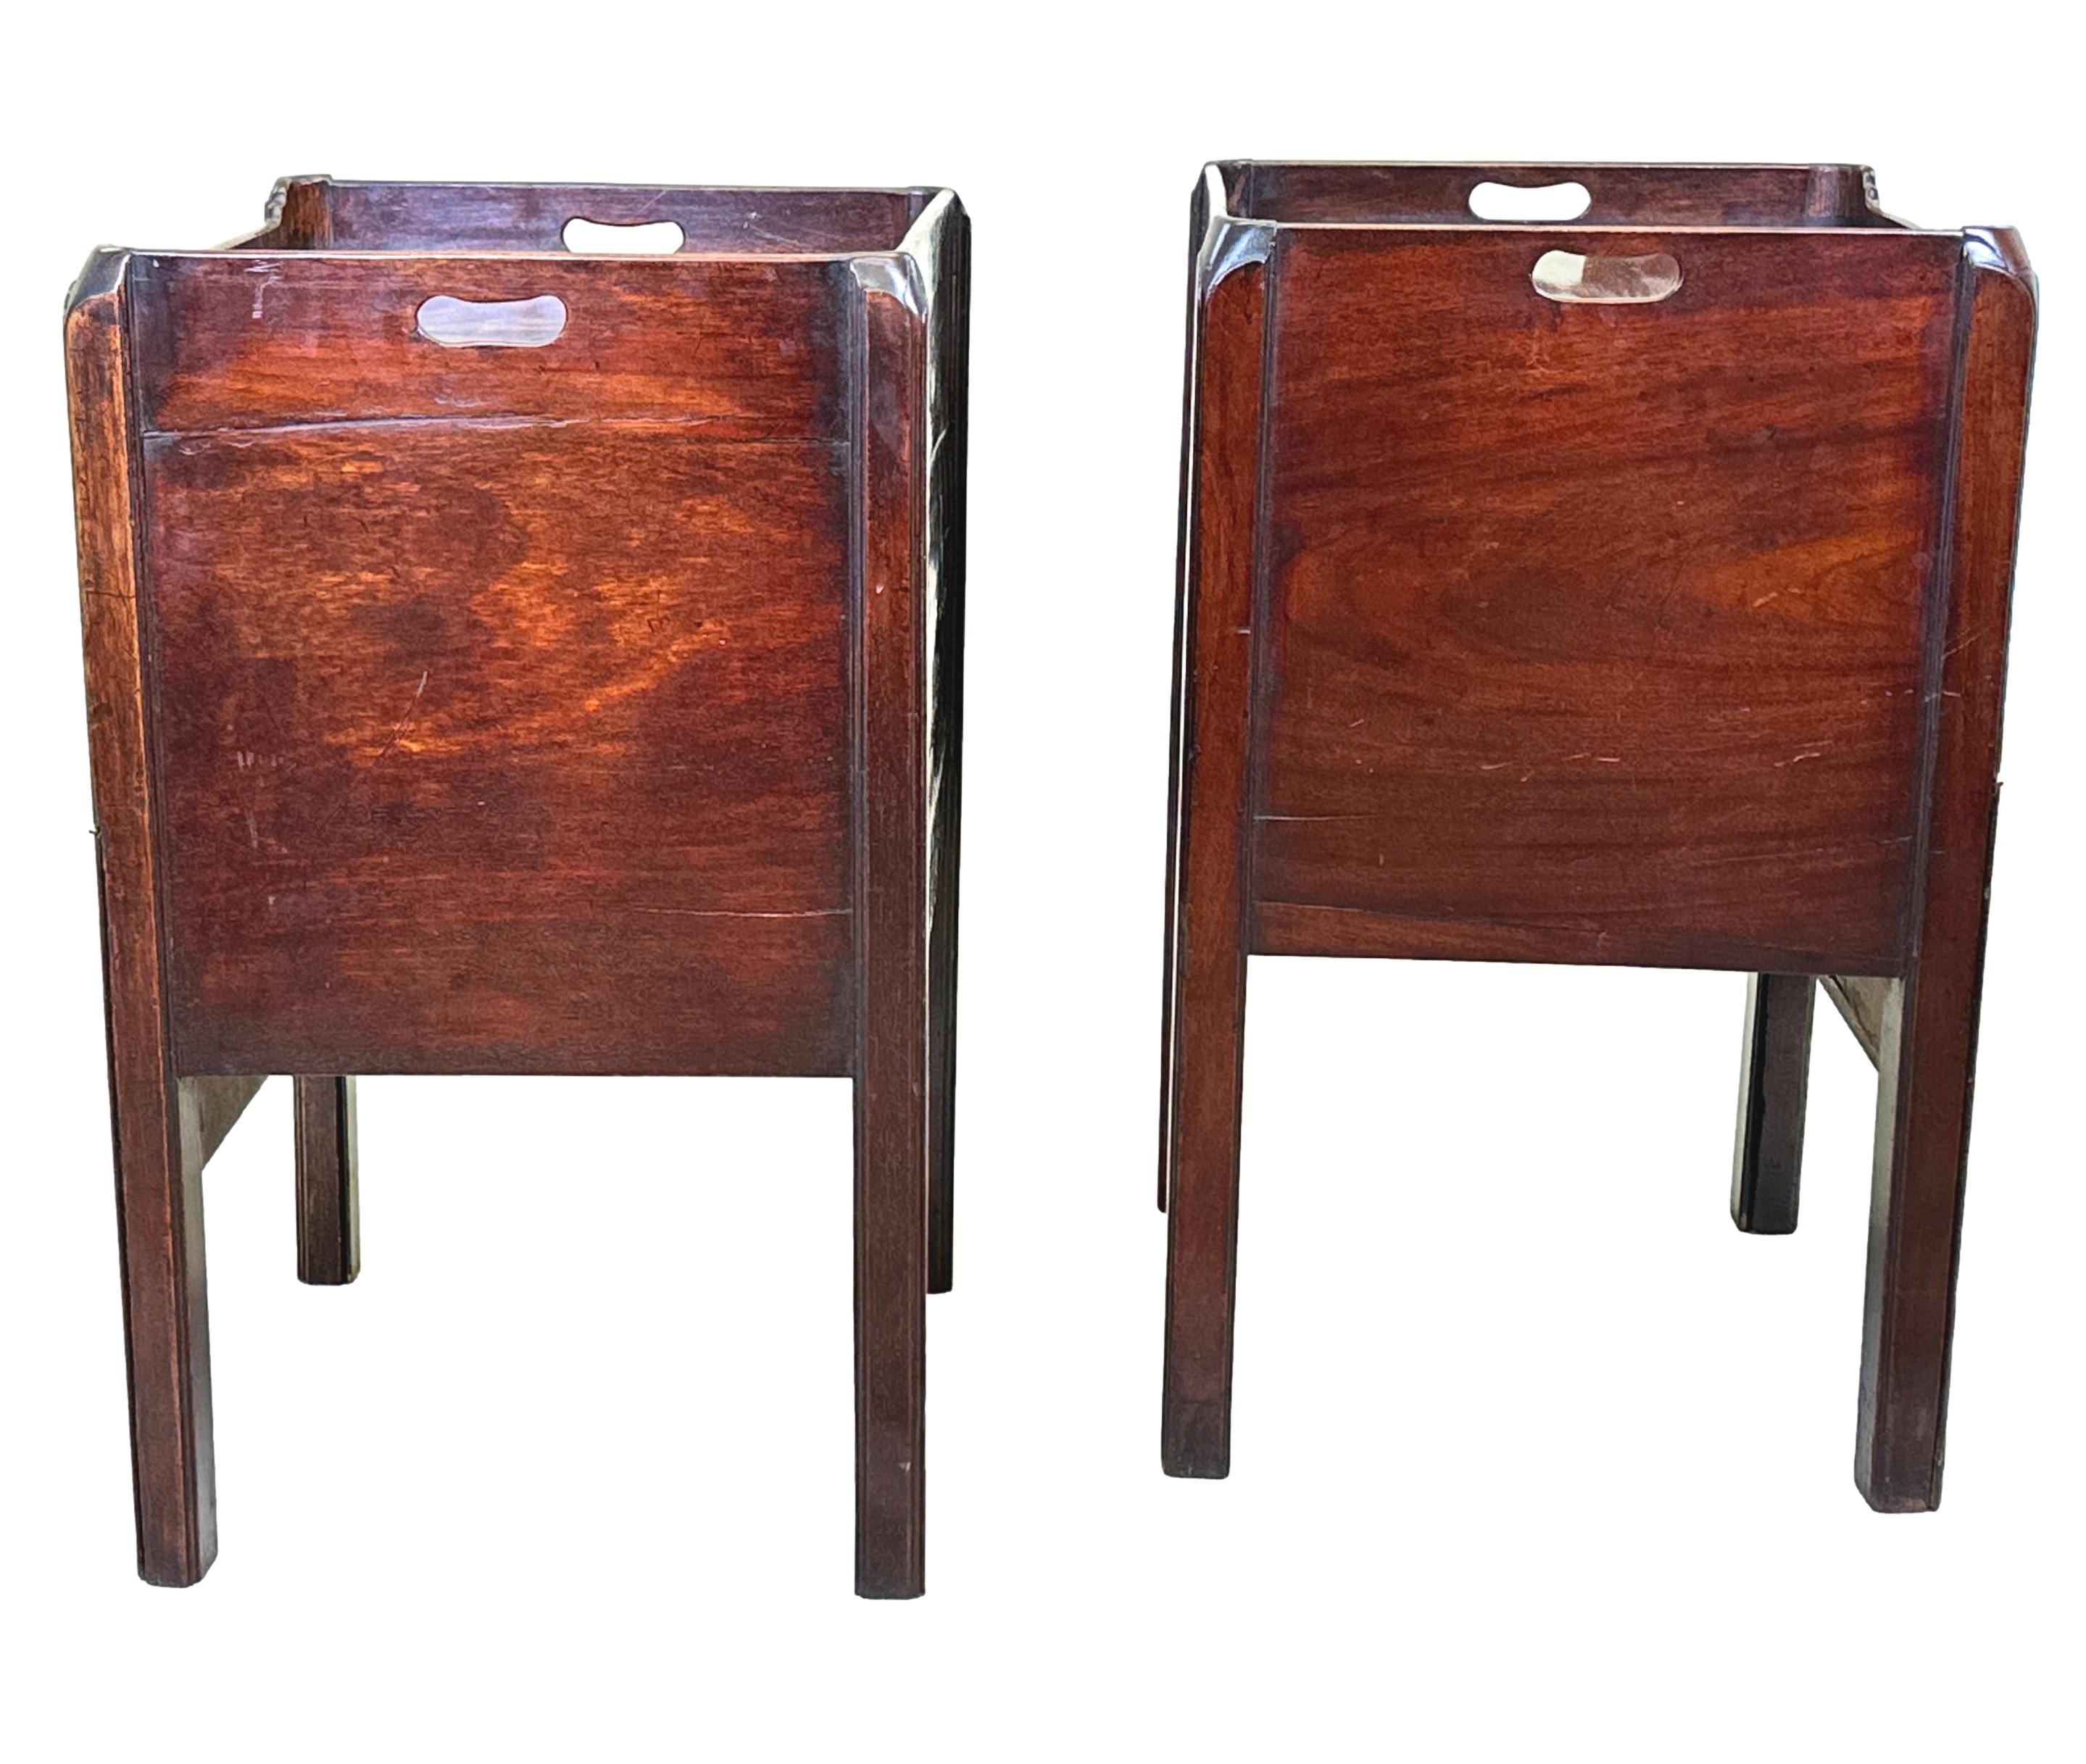 A Good Quality And Attractive Well Matched Pair Of Late 18th Century Mahogany, George III Period, Bedside Night Tables, Or Tray Top Commodes, Having Well Figured Gallery Tops Over Cupboard Doors With Elegant Strung Decoration, Over Converted Pull